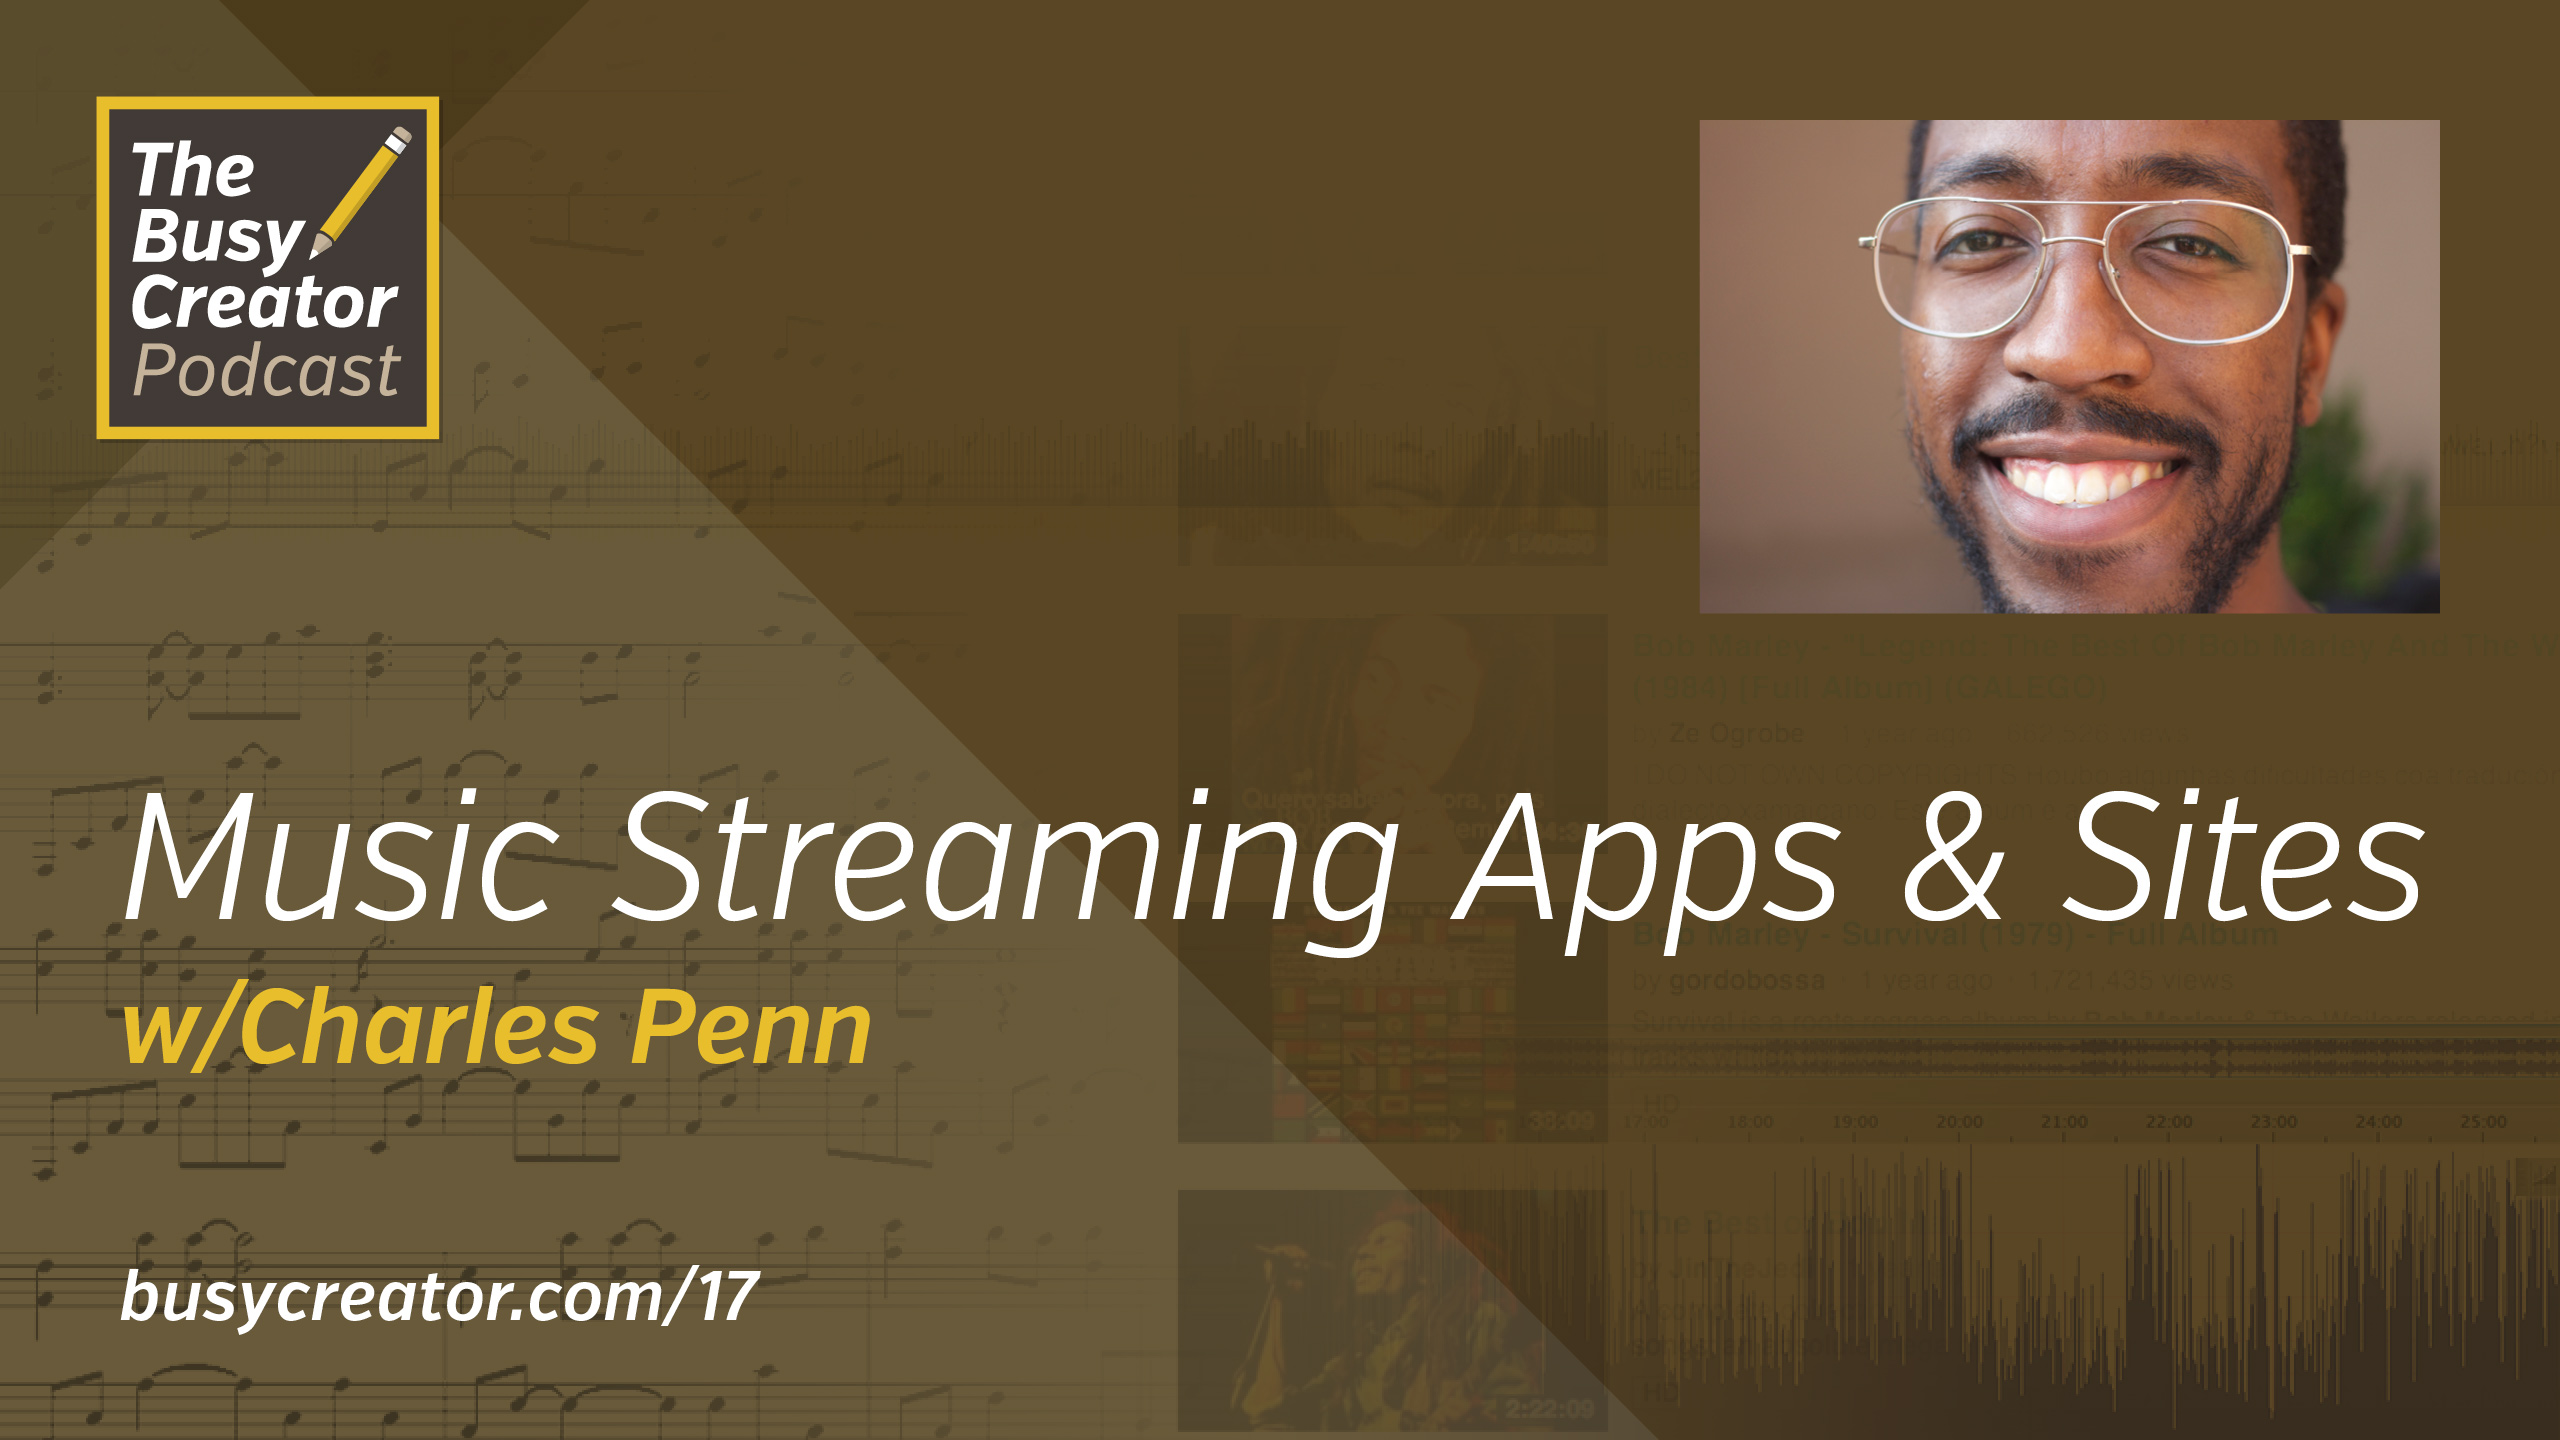 Listen Up: Examining Music Streaming Apps & Websites, with Charles Penn